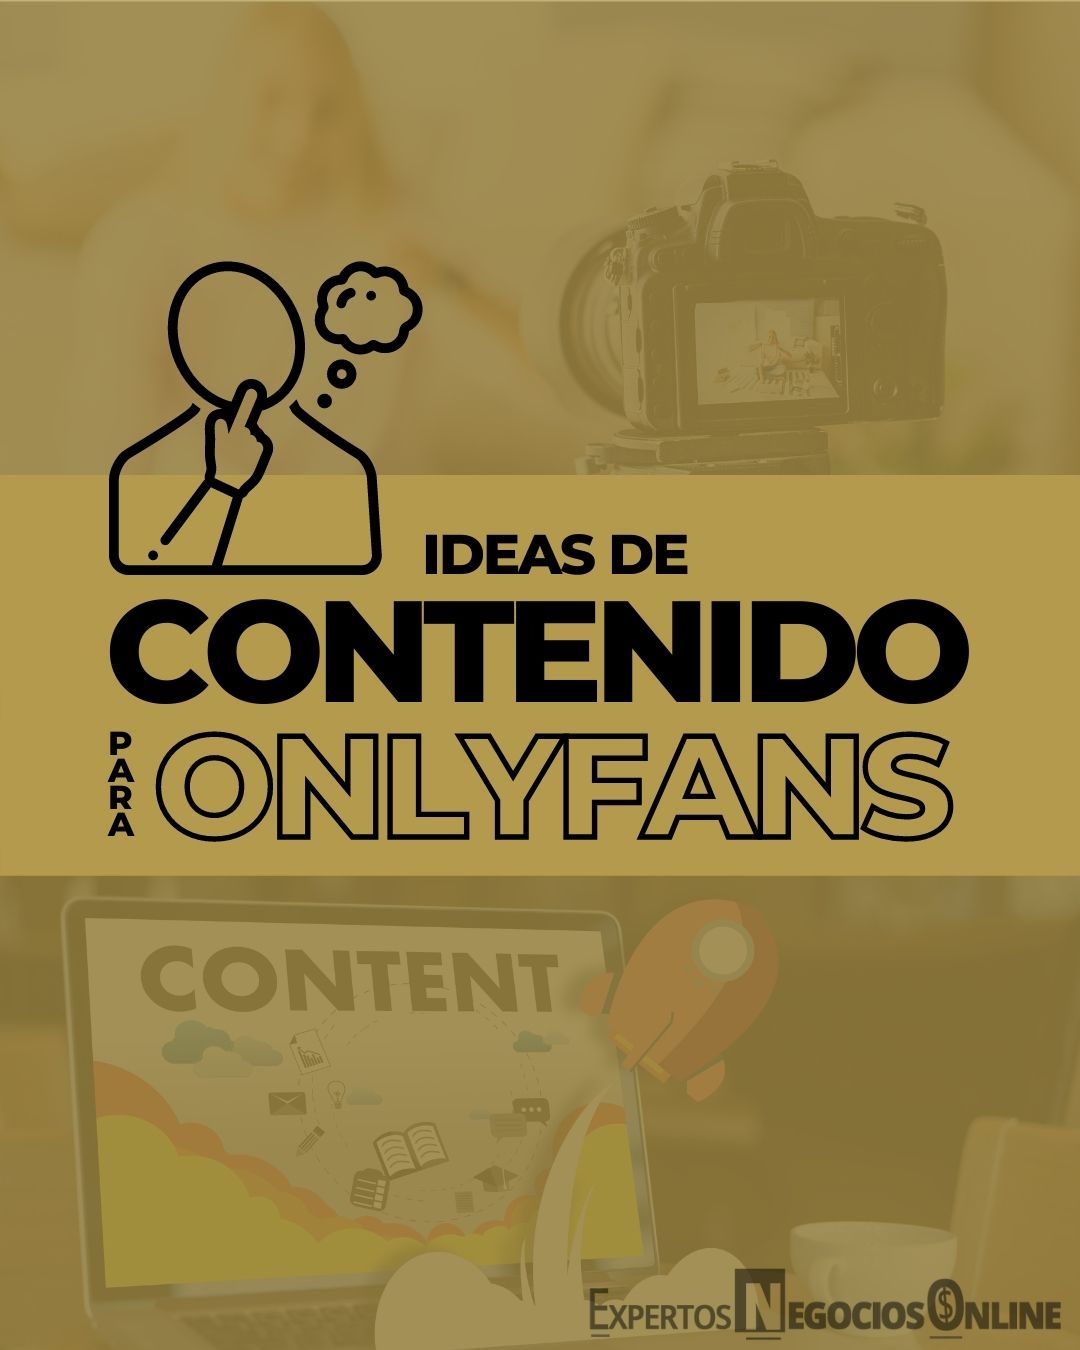 Only fans ideas